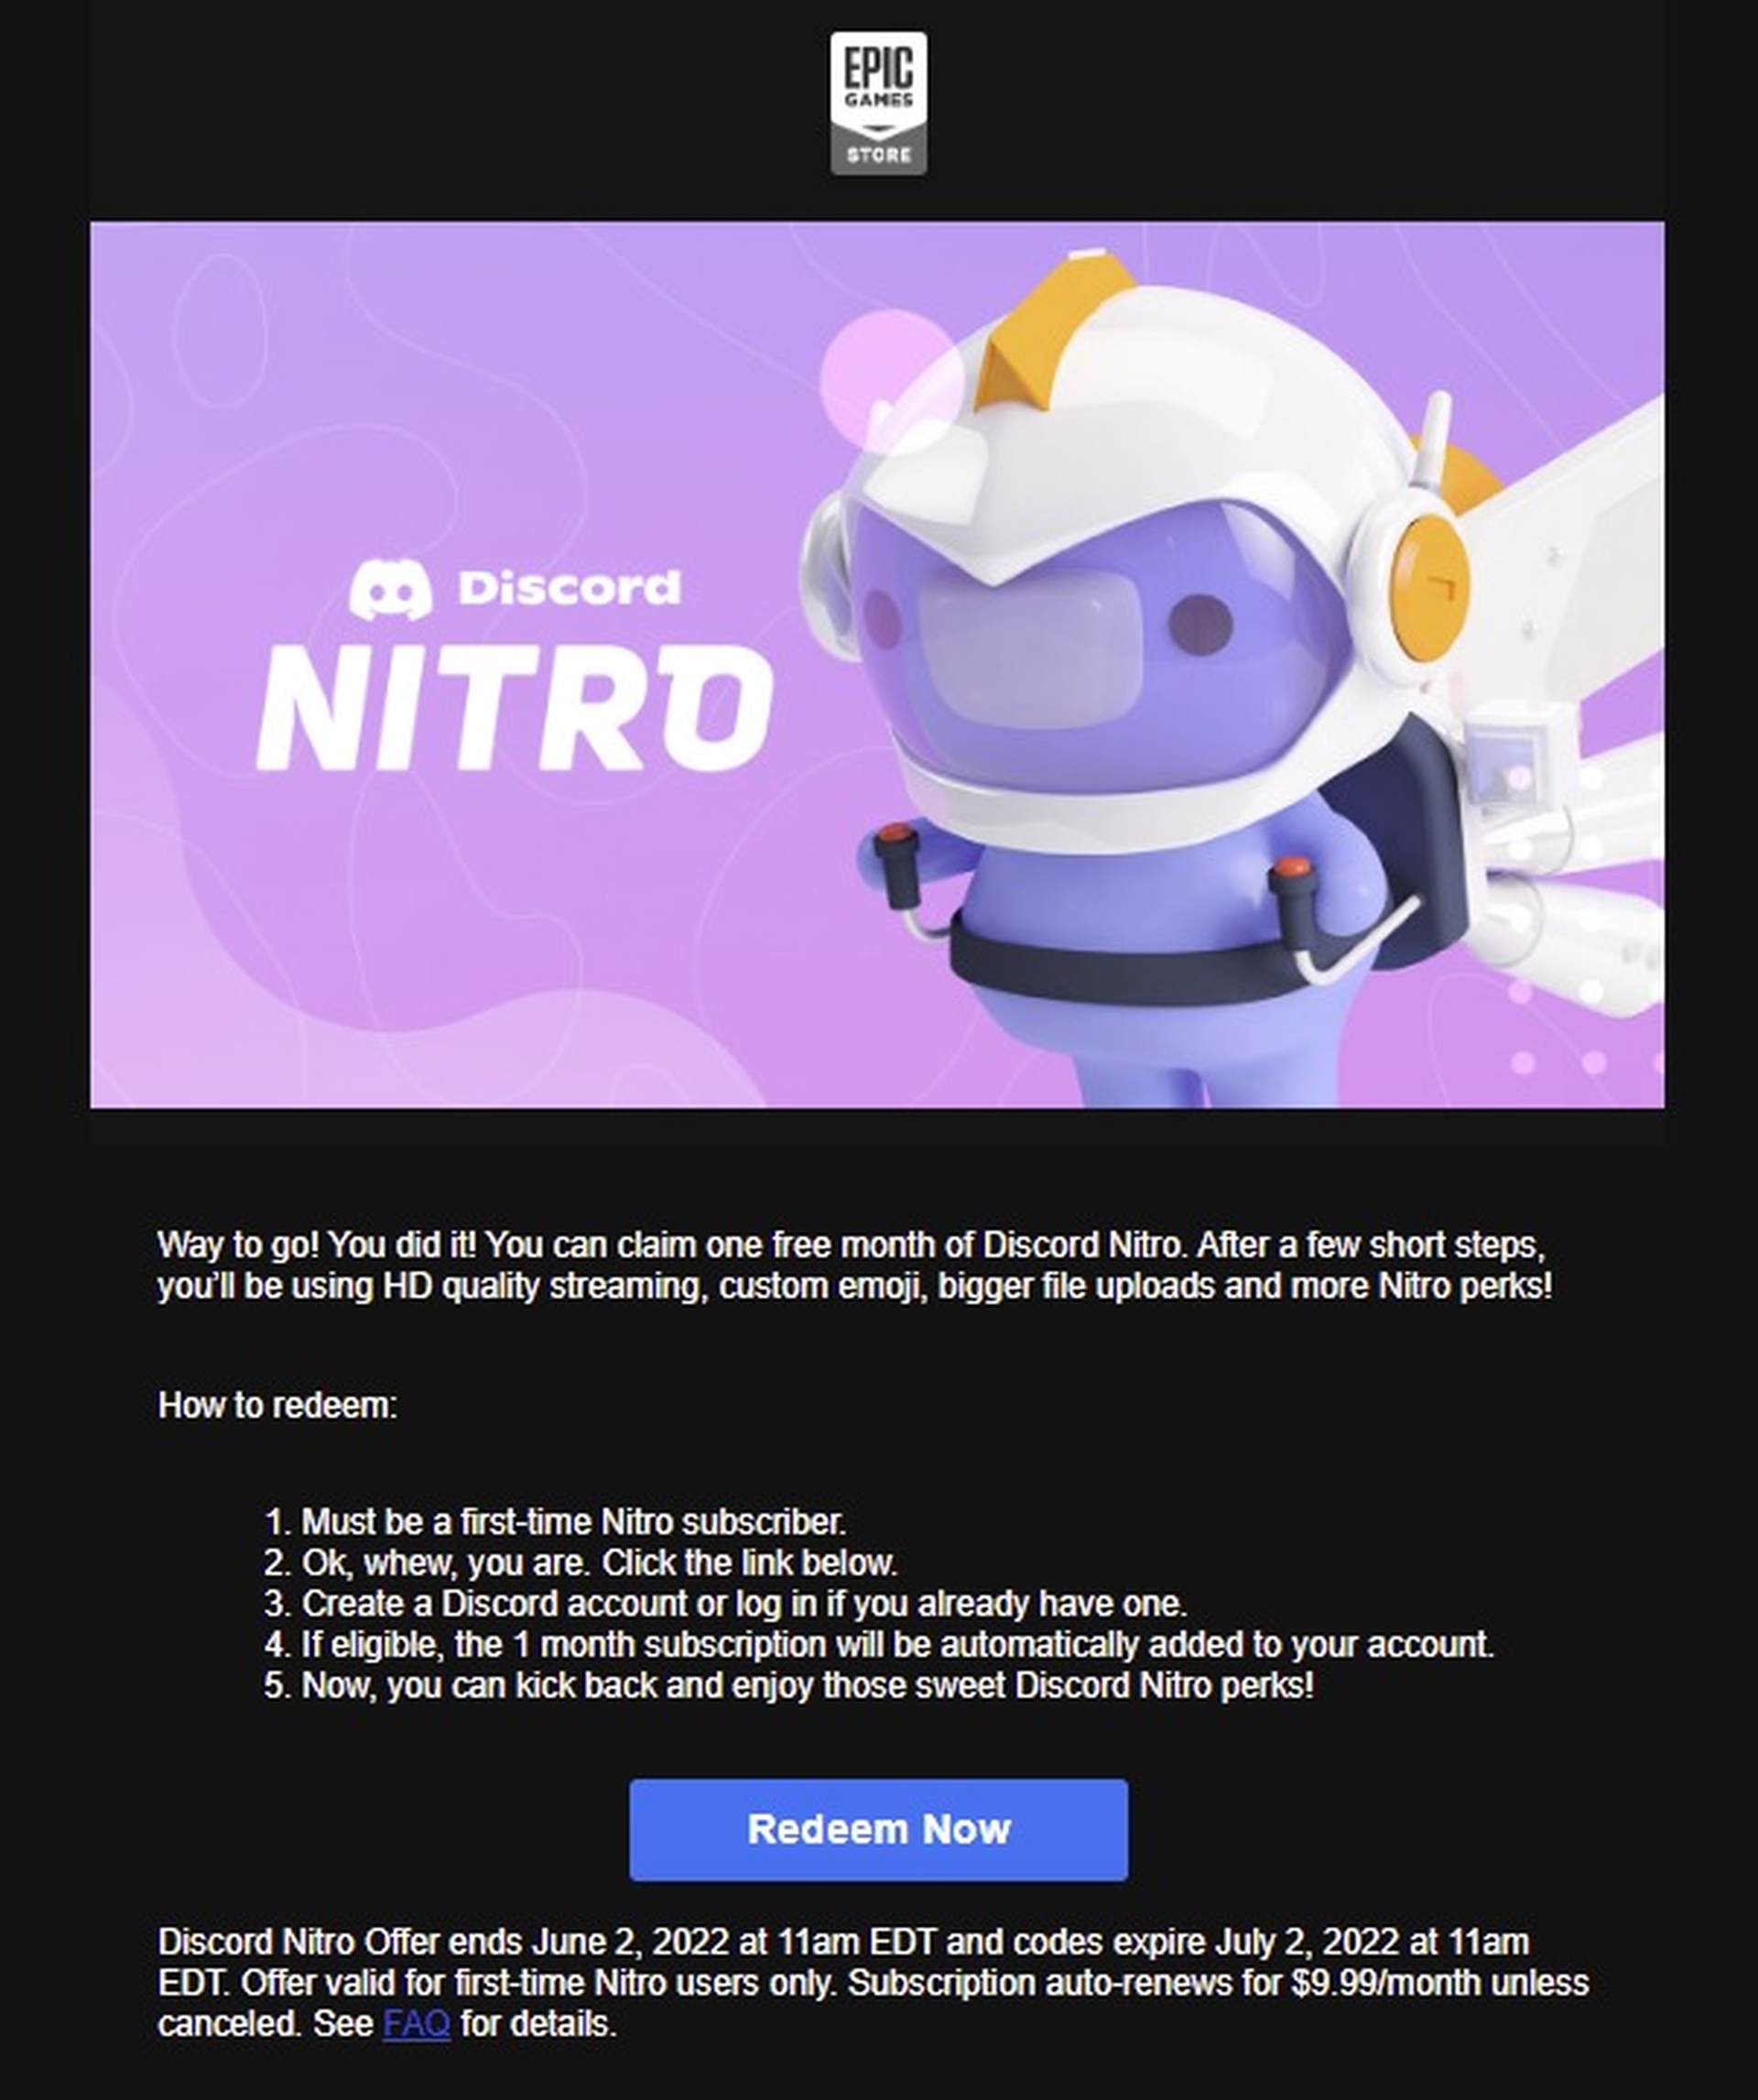 In this article, we are going to go over how to claim Discord Nitro Epic Games, so you can enjoy the features that Discord Nitro provides for free.